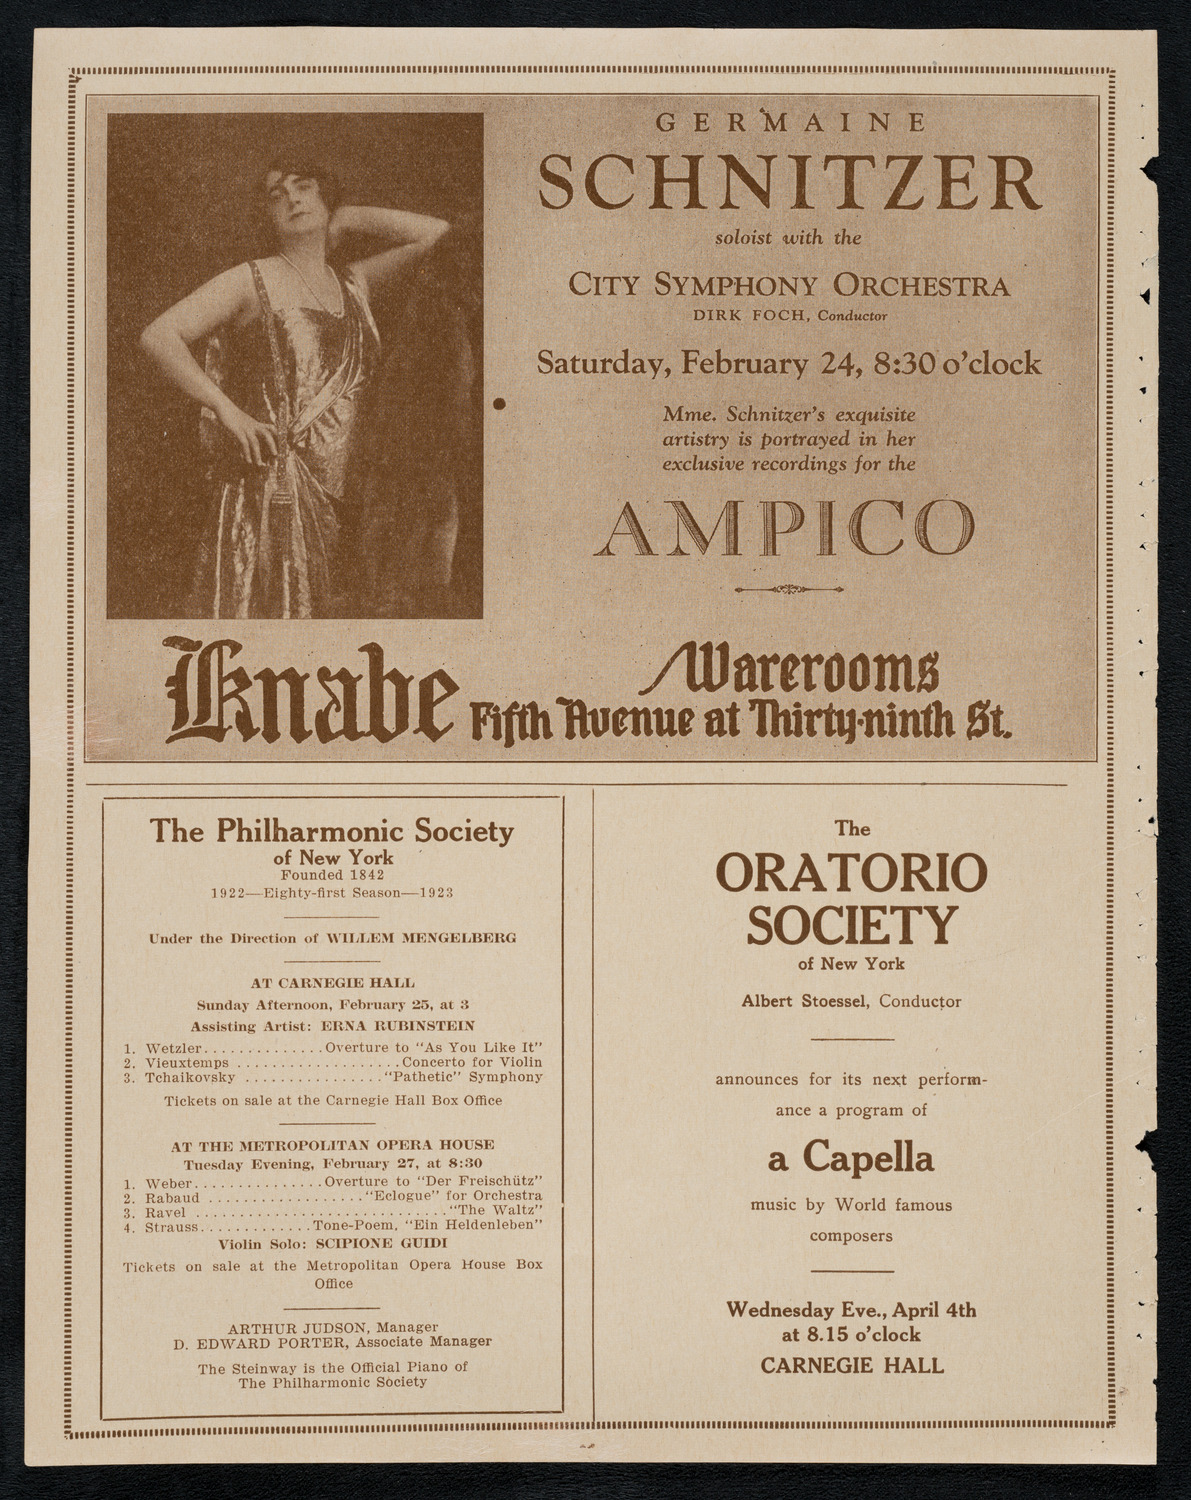 Universal Negro Improvement Association Meeting and Concert, February 23, 1923, program page 12